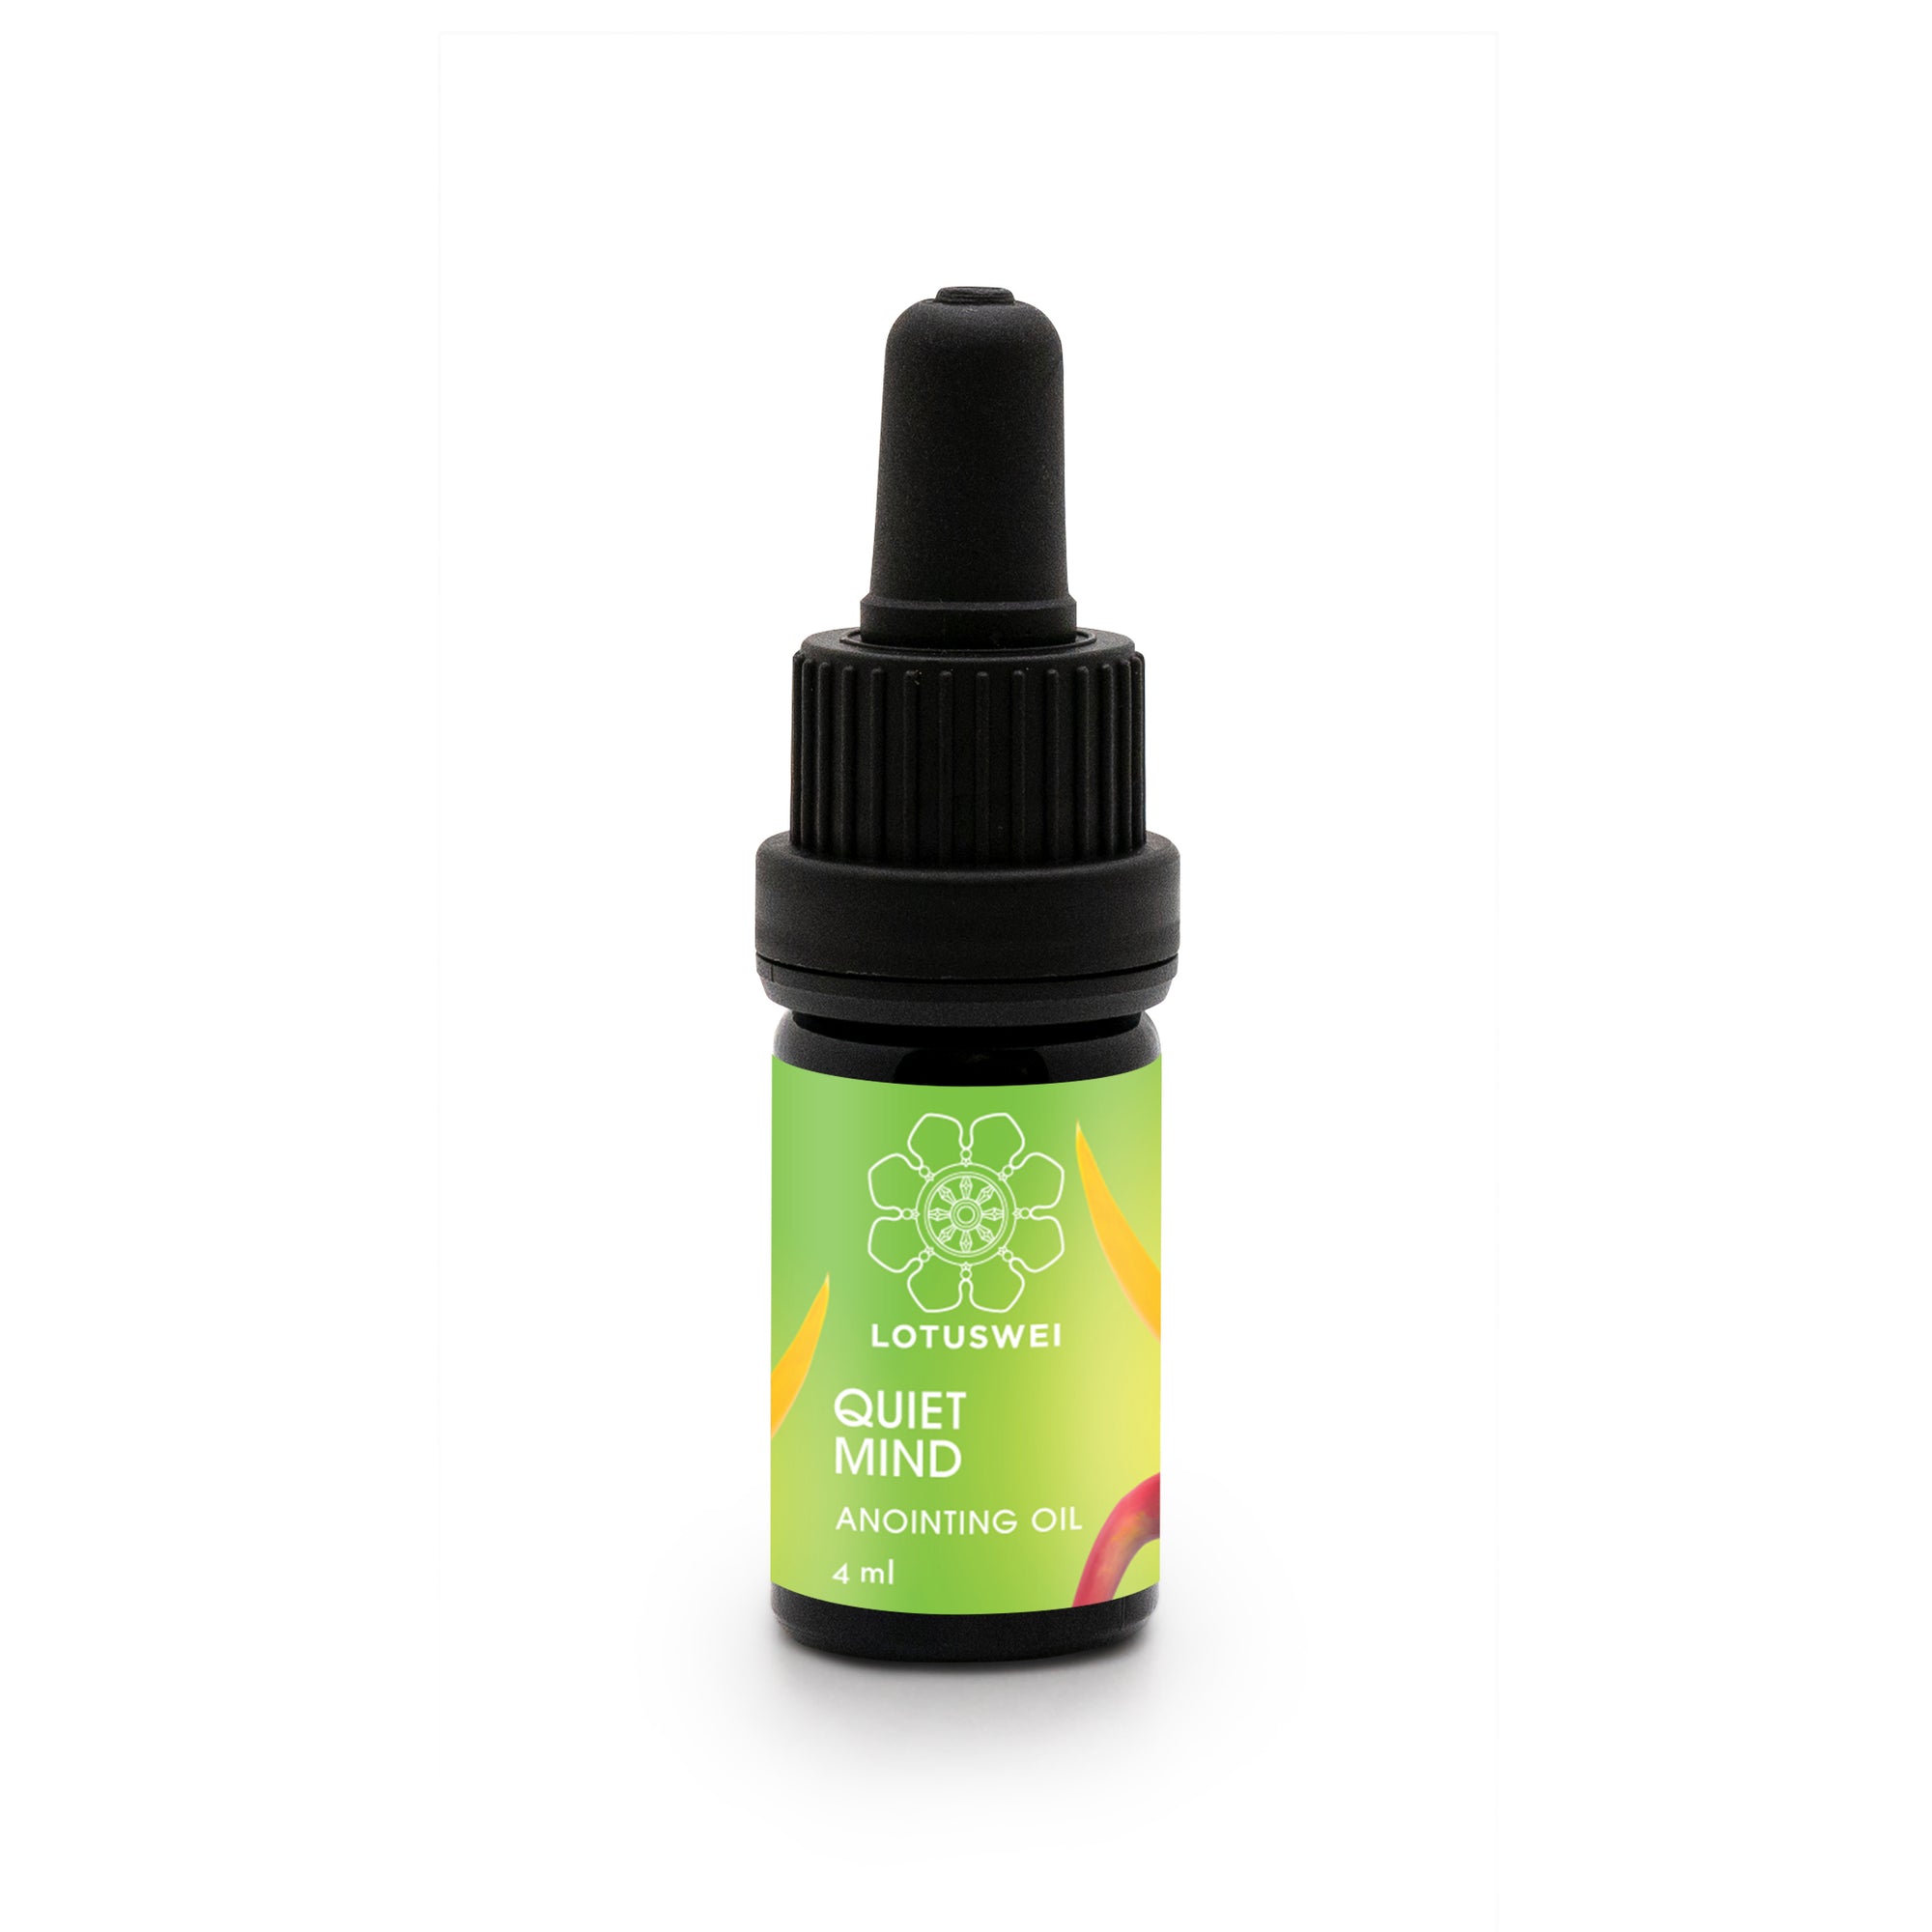 Quiet Mind Anointing Oil